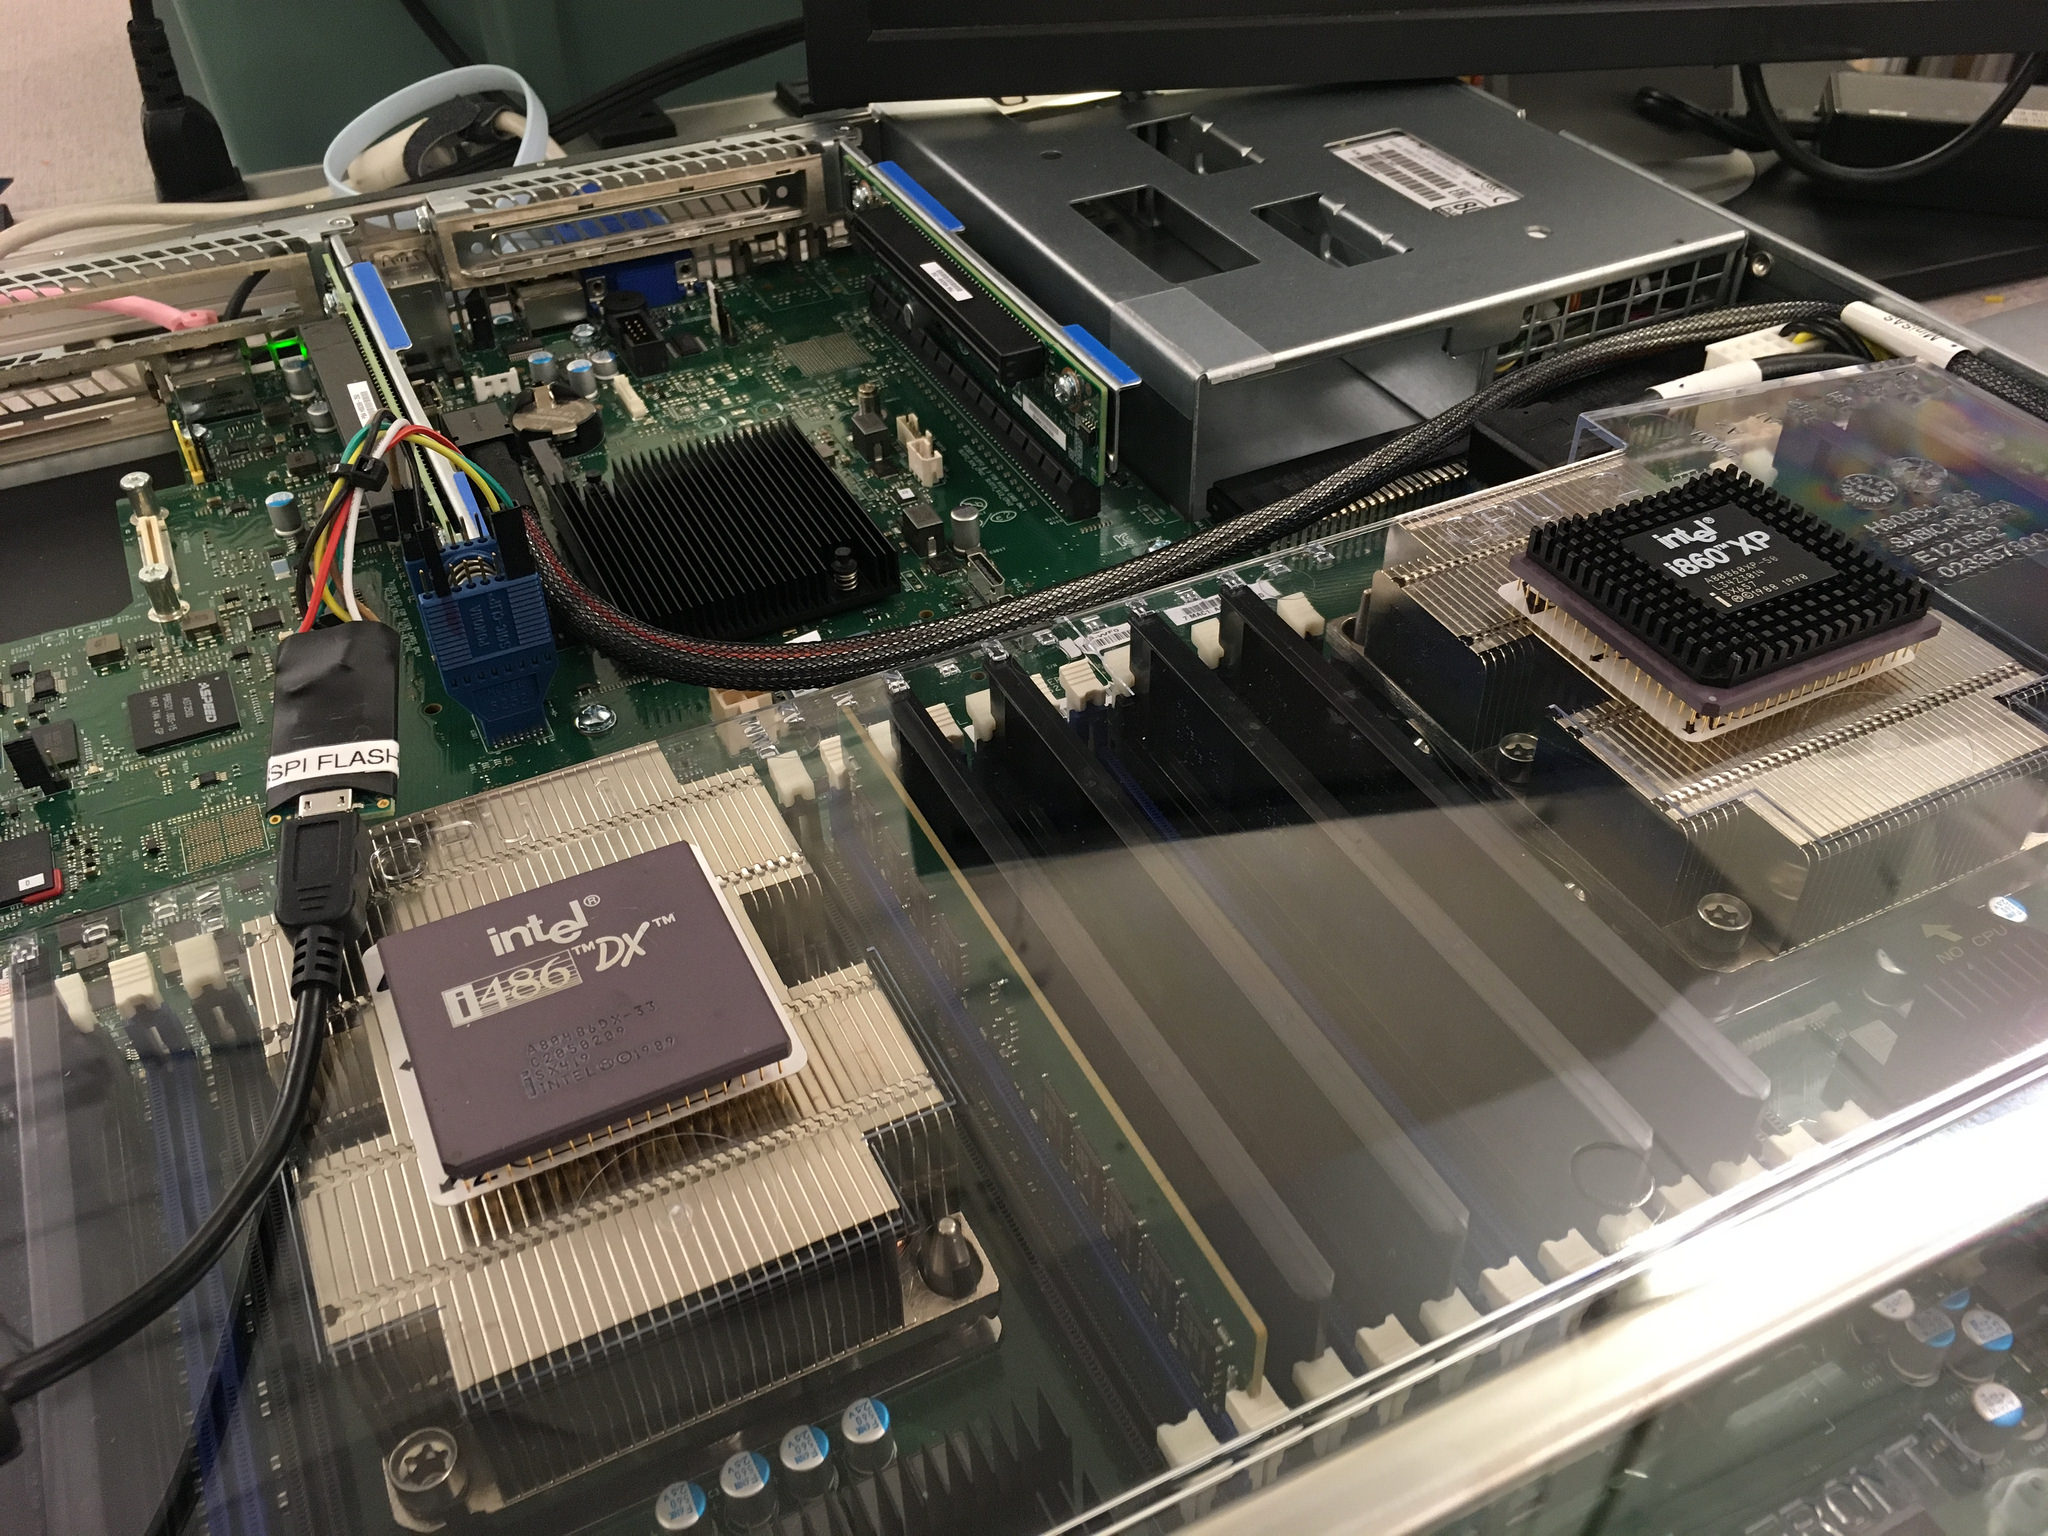 Installing LinuxBoot on an Intel S2600 mainboard